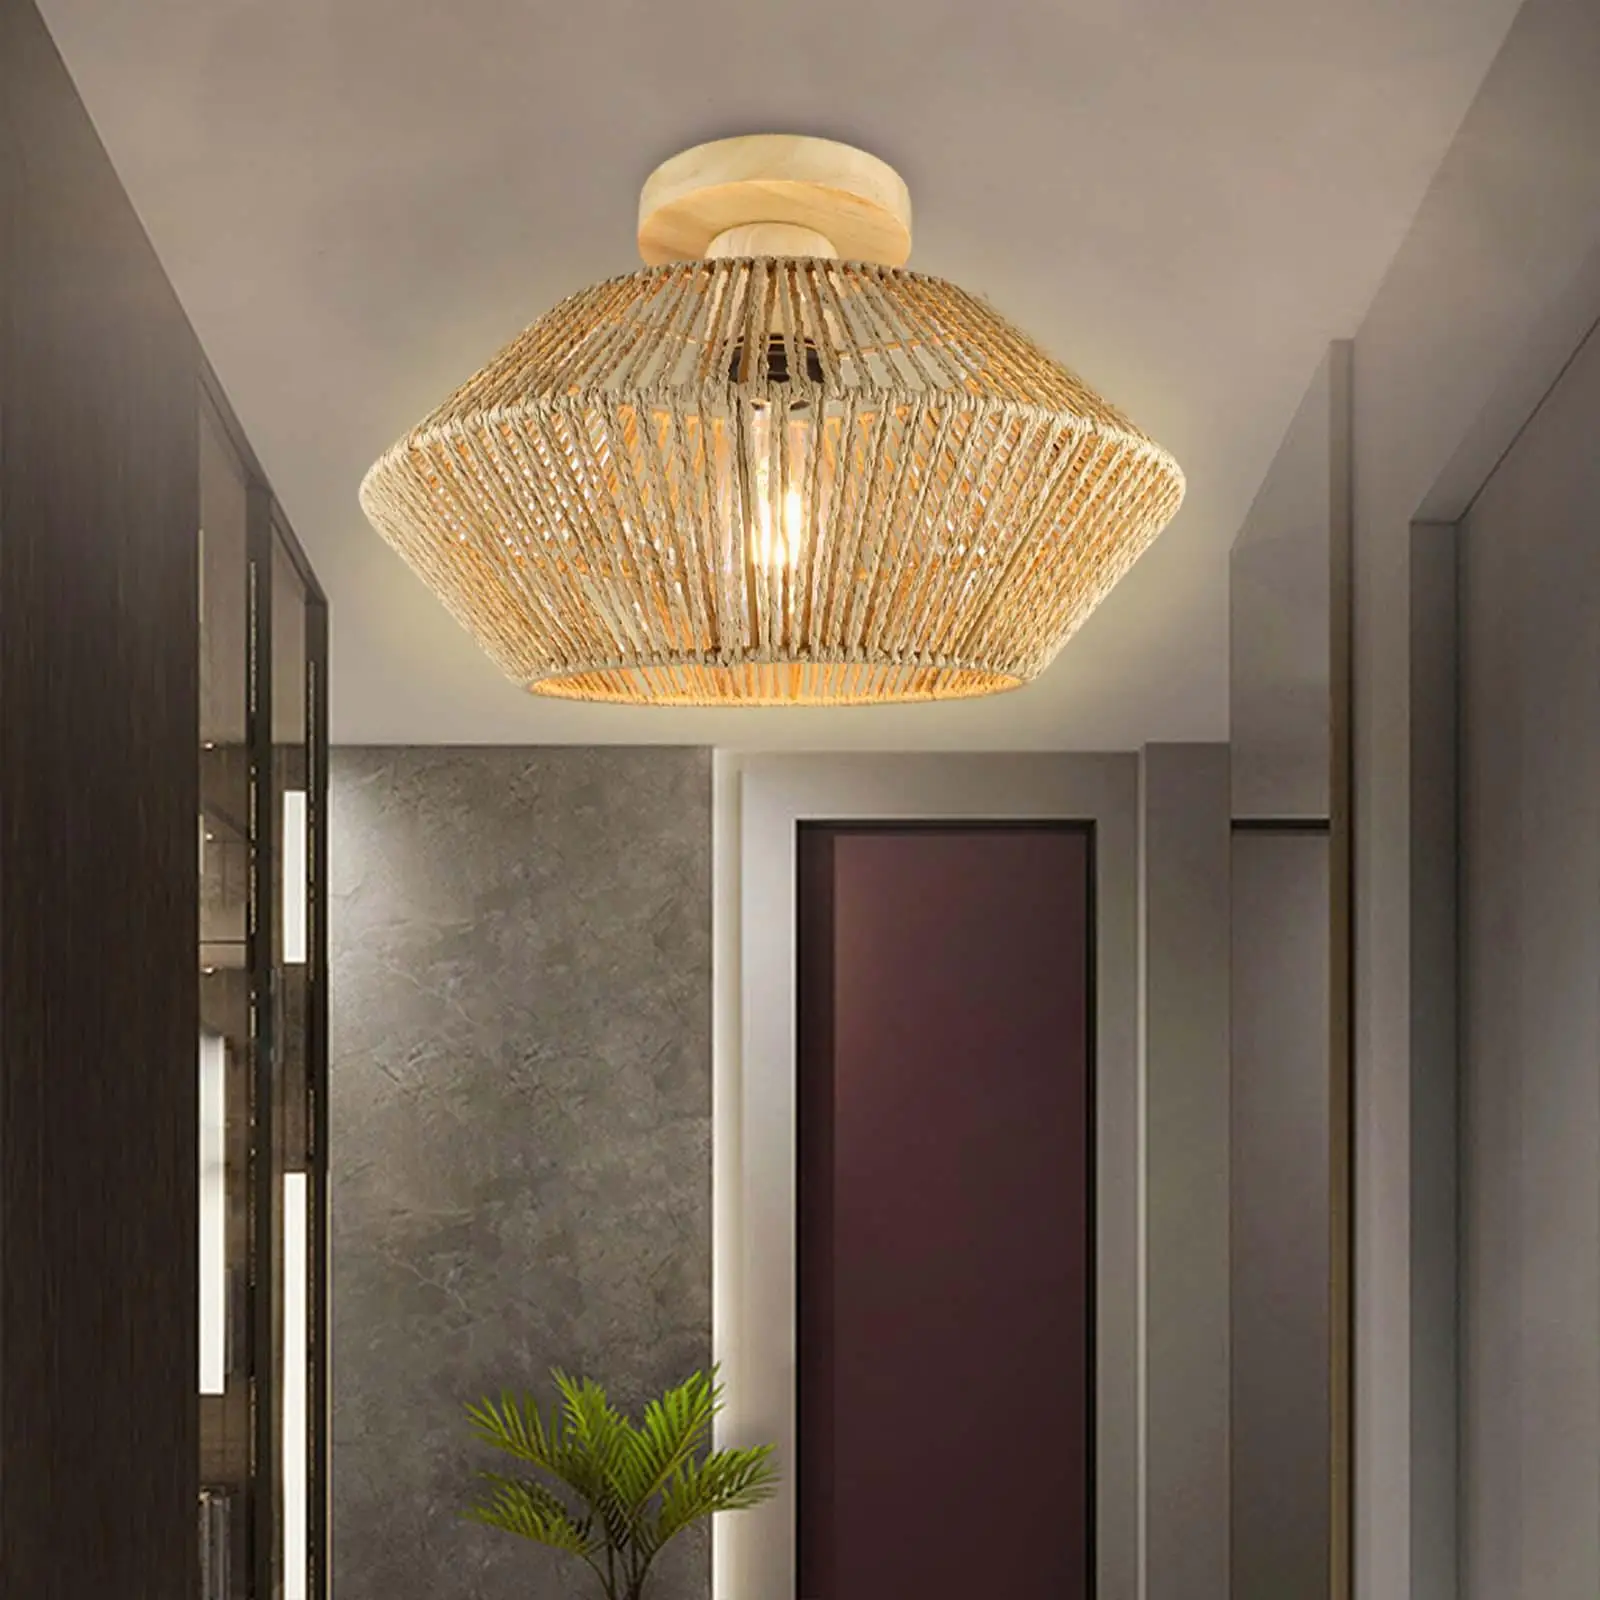 Minimalist LED Ceiling Lamp Shades Light Fixture Handmade Woven Chandelier Lampshade for Bedroom Office Laundry Restaurant